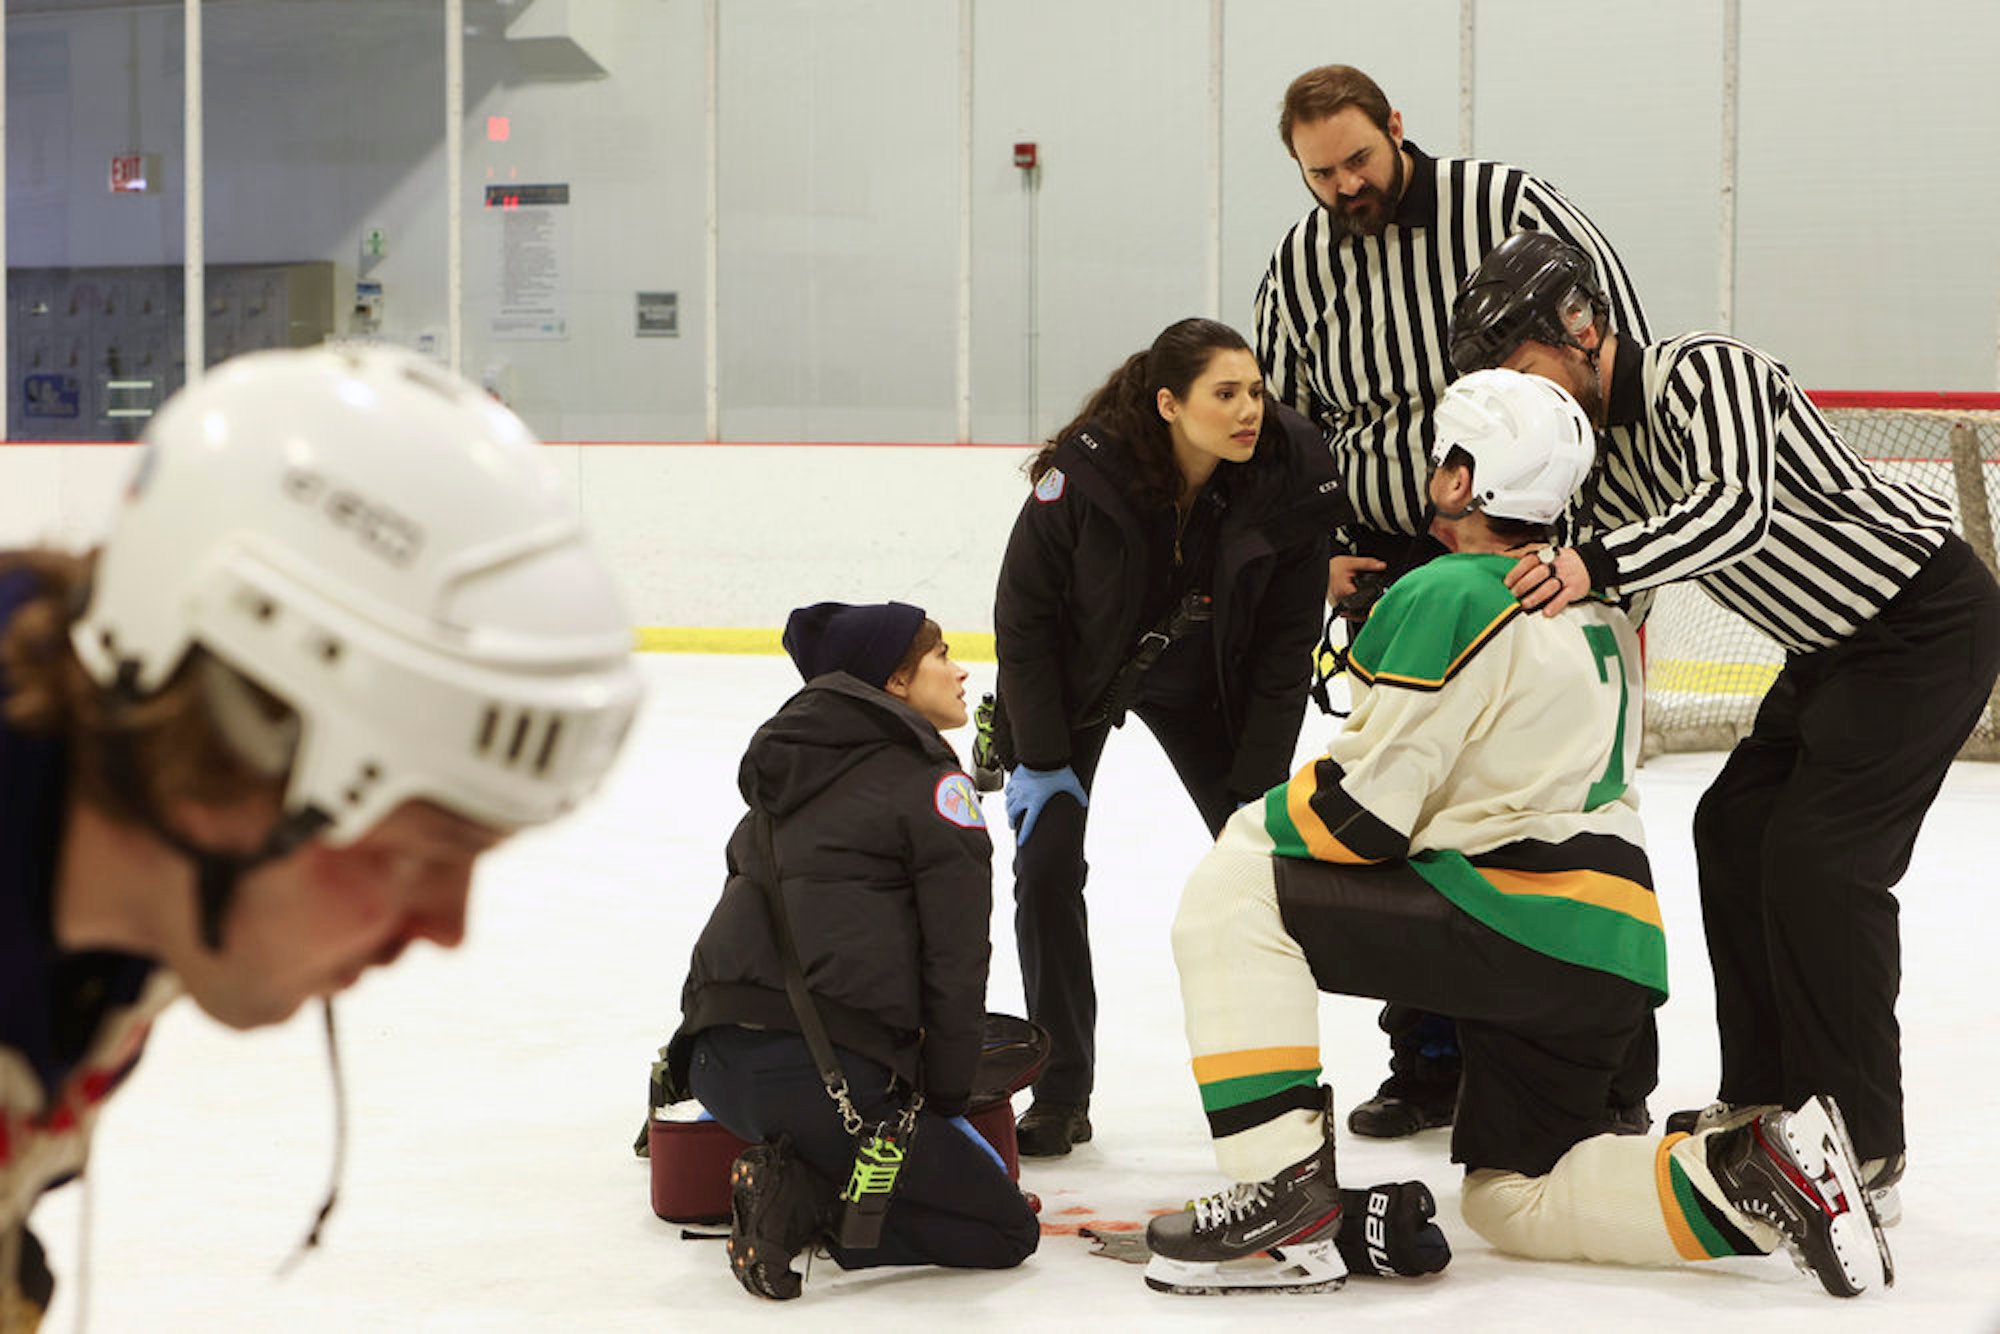 Caitlin Carver as Emma Jacobs and Hanako Greensmith as Violet Mikami in an ice skating rink treating an injured skater in 'Chicago Fire' Season 10 Episode 17